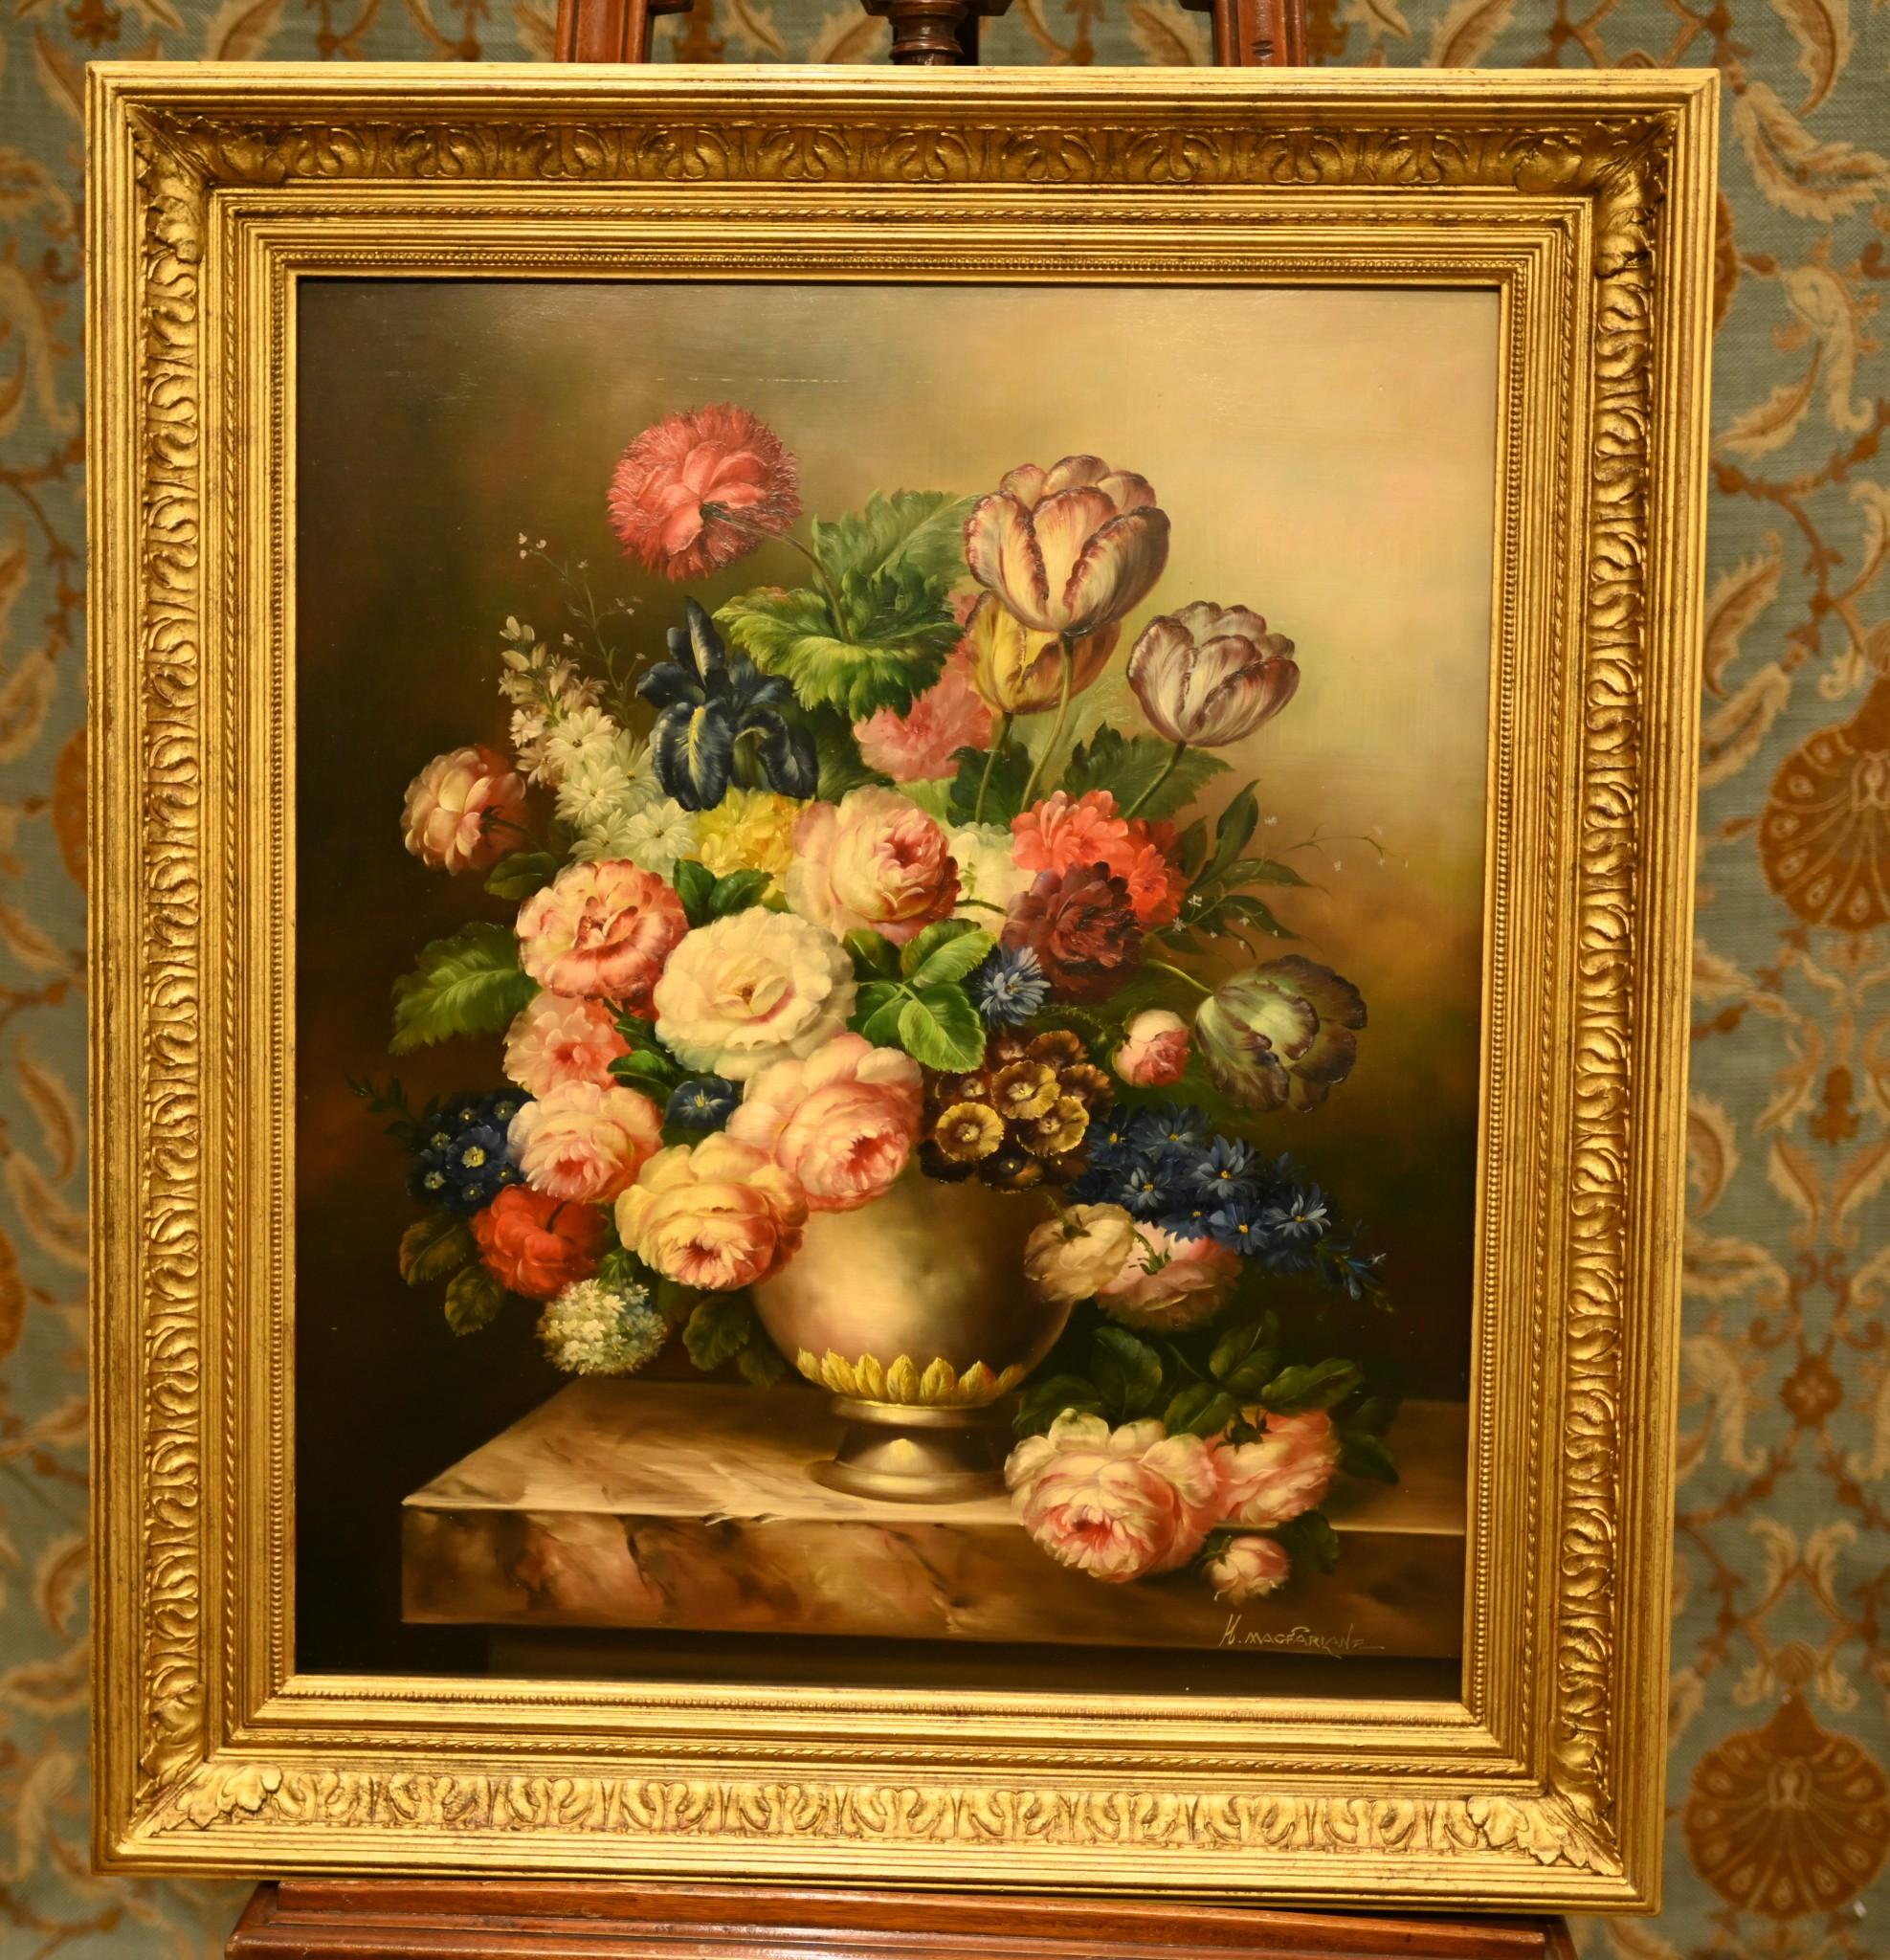 Wonderful English oil painting of a vivid display of flowers in a vase
Such a bright work full of energy, just look at the colours
Signed H Magfarlane in bottom right corner, please see close up photo
Artist very talented due to intricate brushwork,